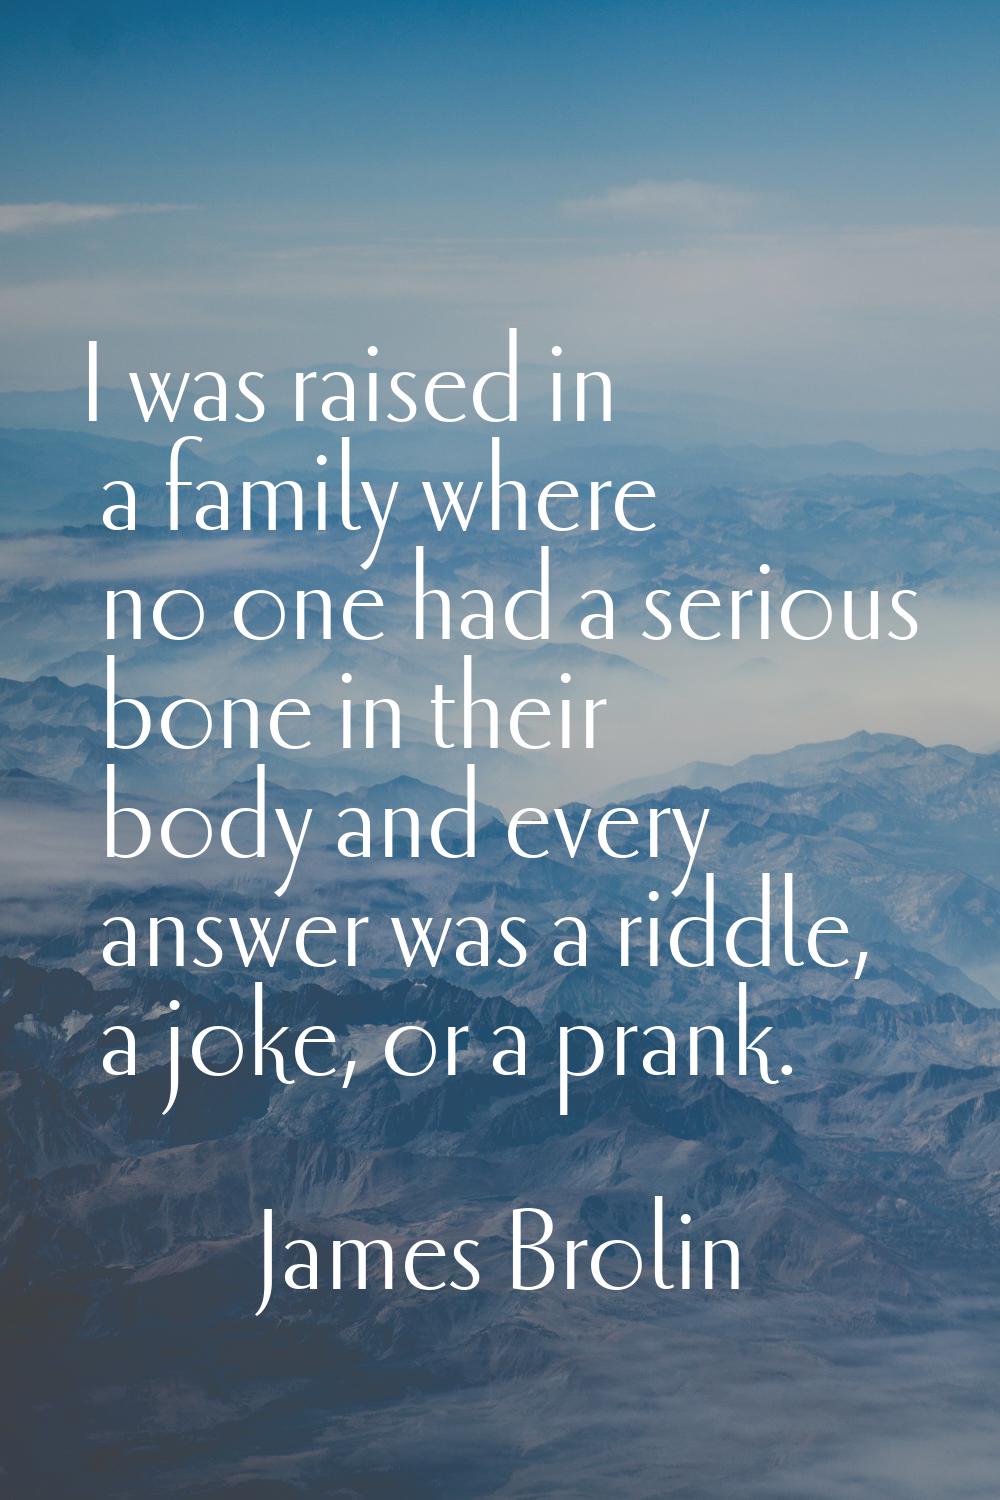 I was raised in a family where no one had a serious bone in their body and every answer was a riddl